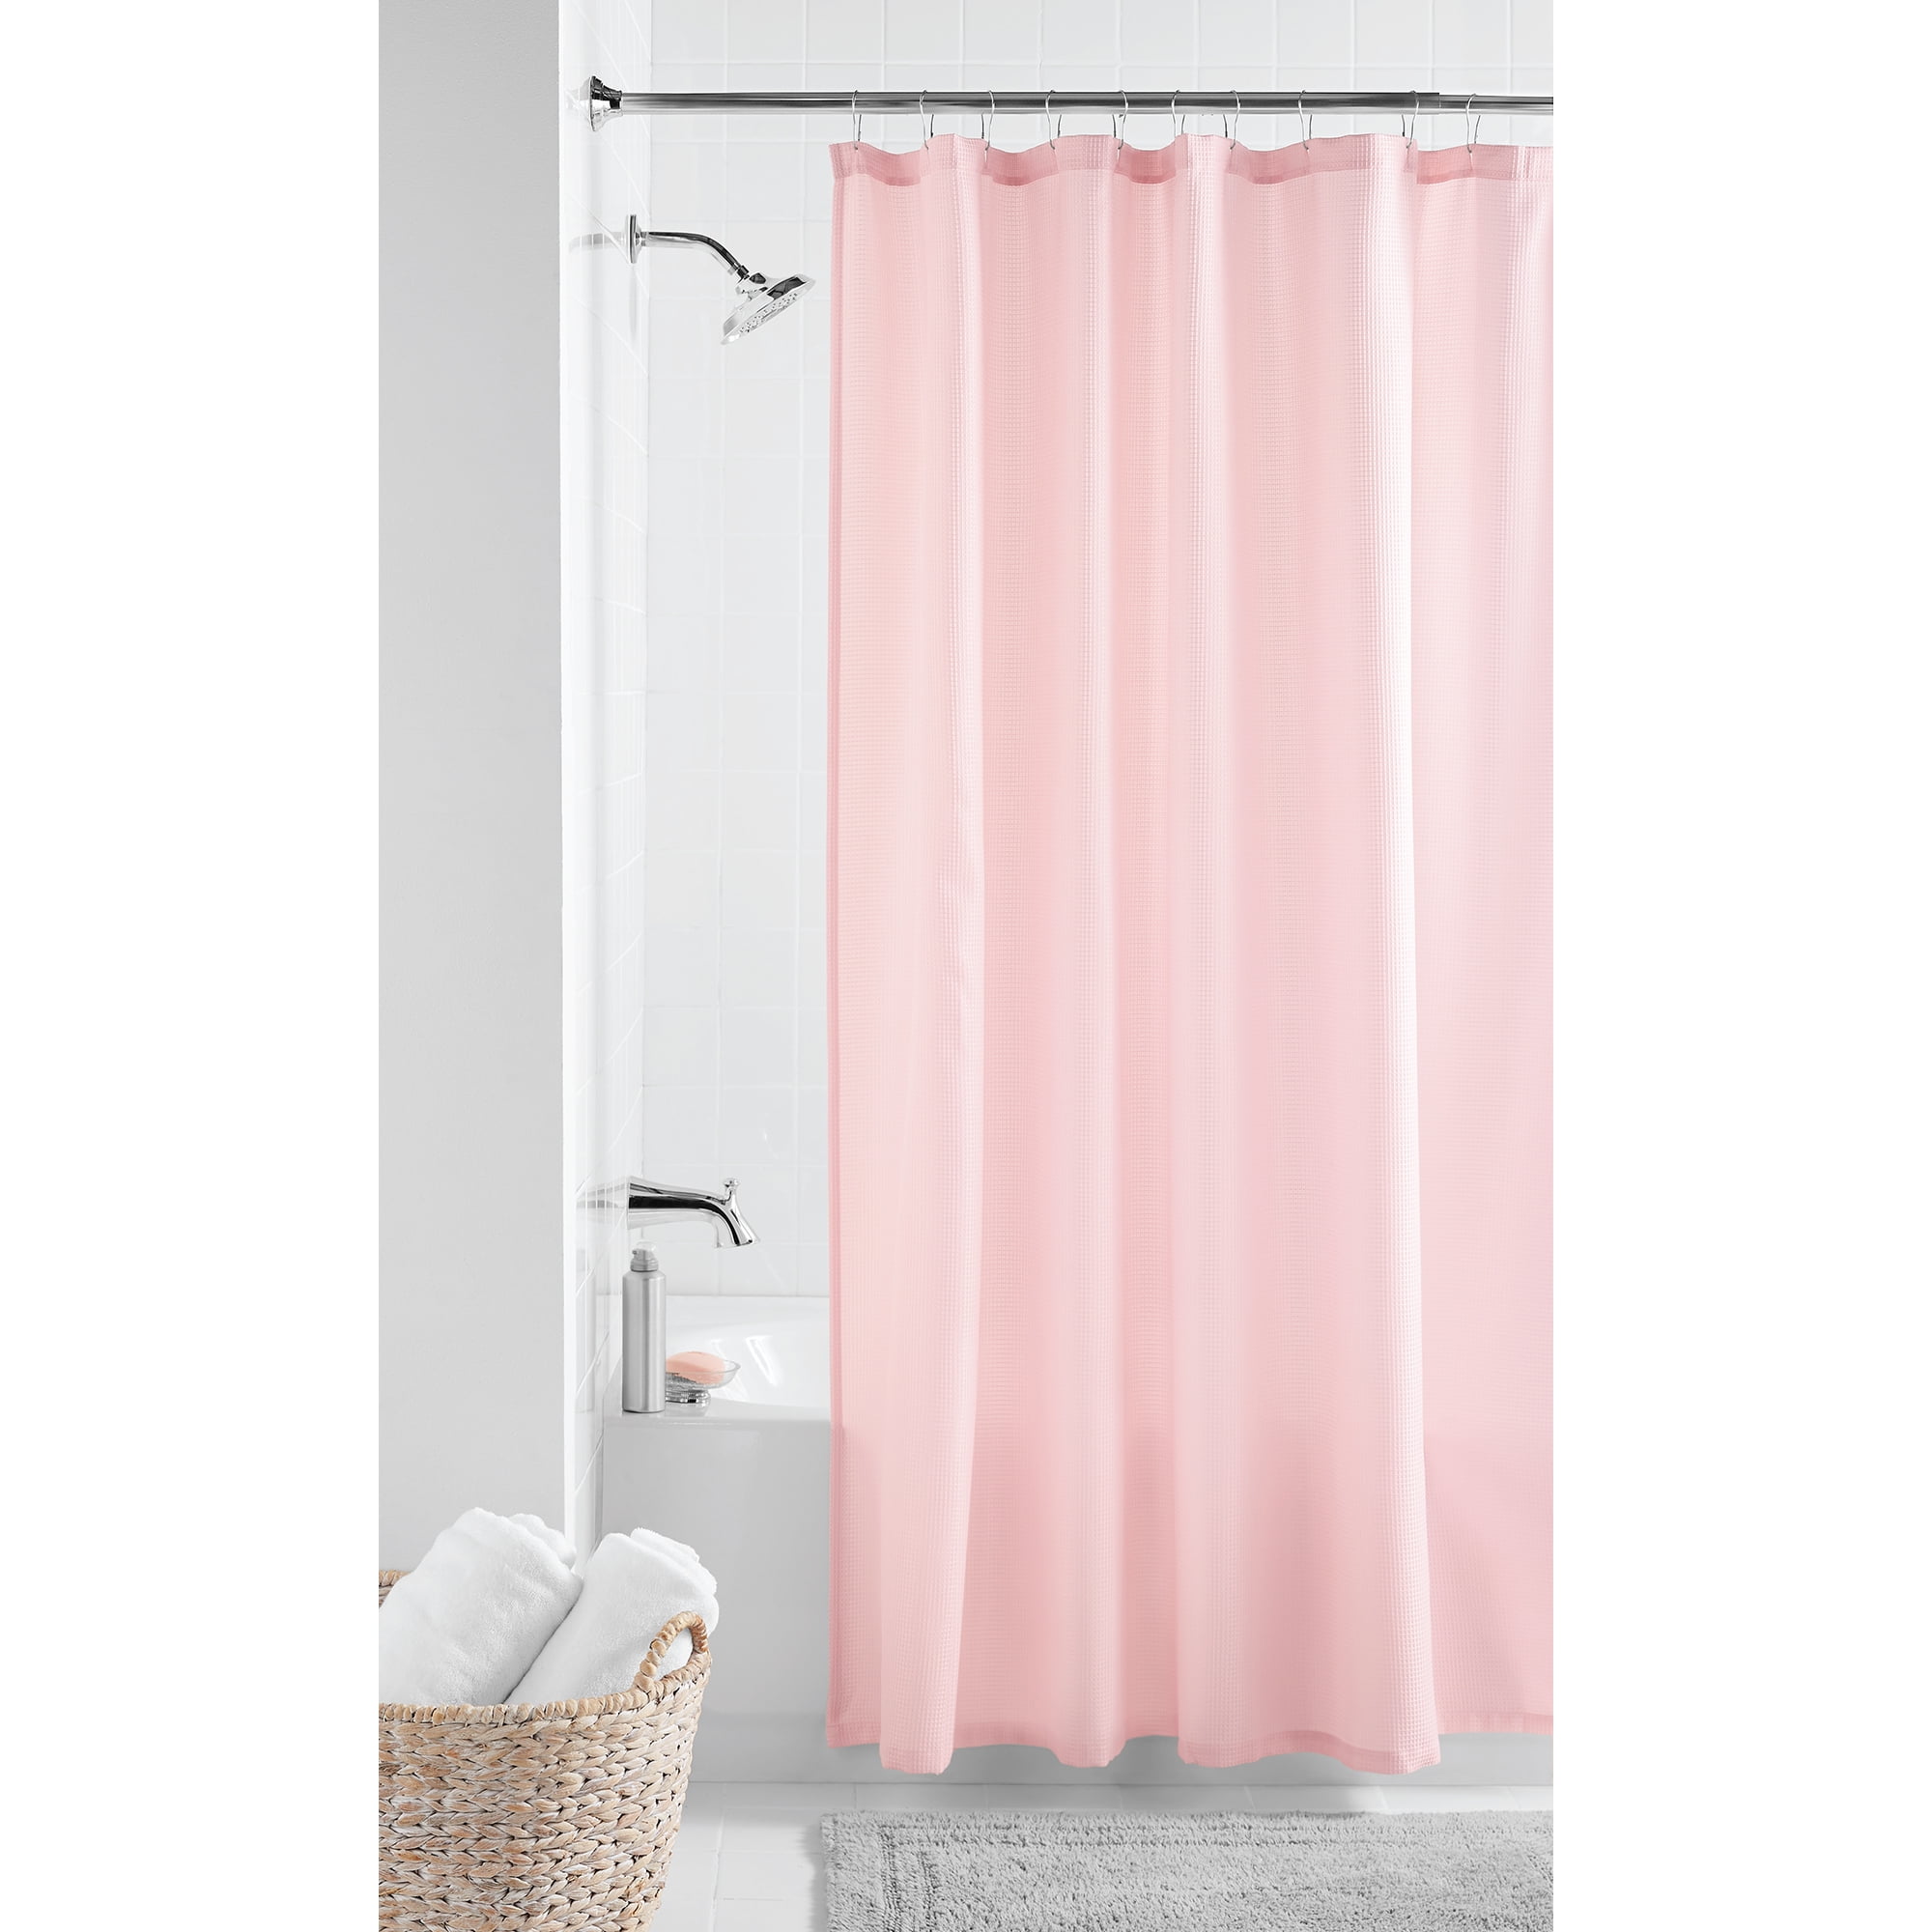 Long Shower Curtain Made of Polyester Pink InterDesign Poly Bath Curtains 